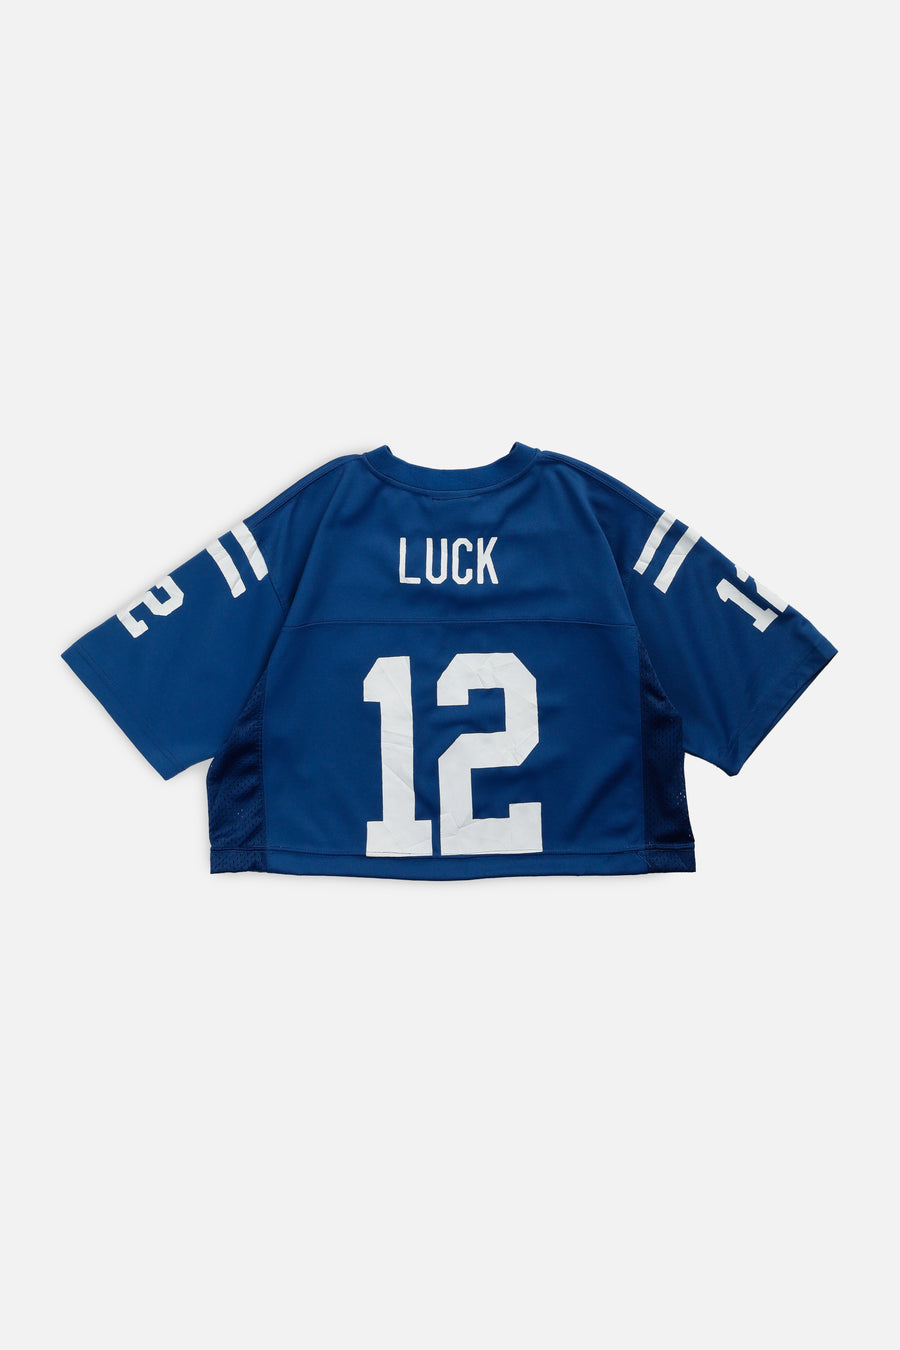 Rework Crop Indianapolis Colts NFL Jersey - S